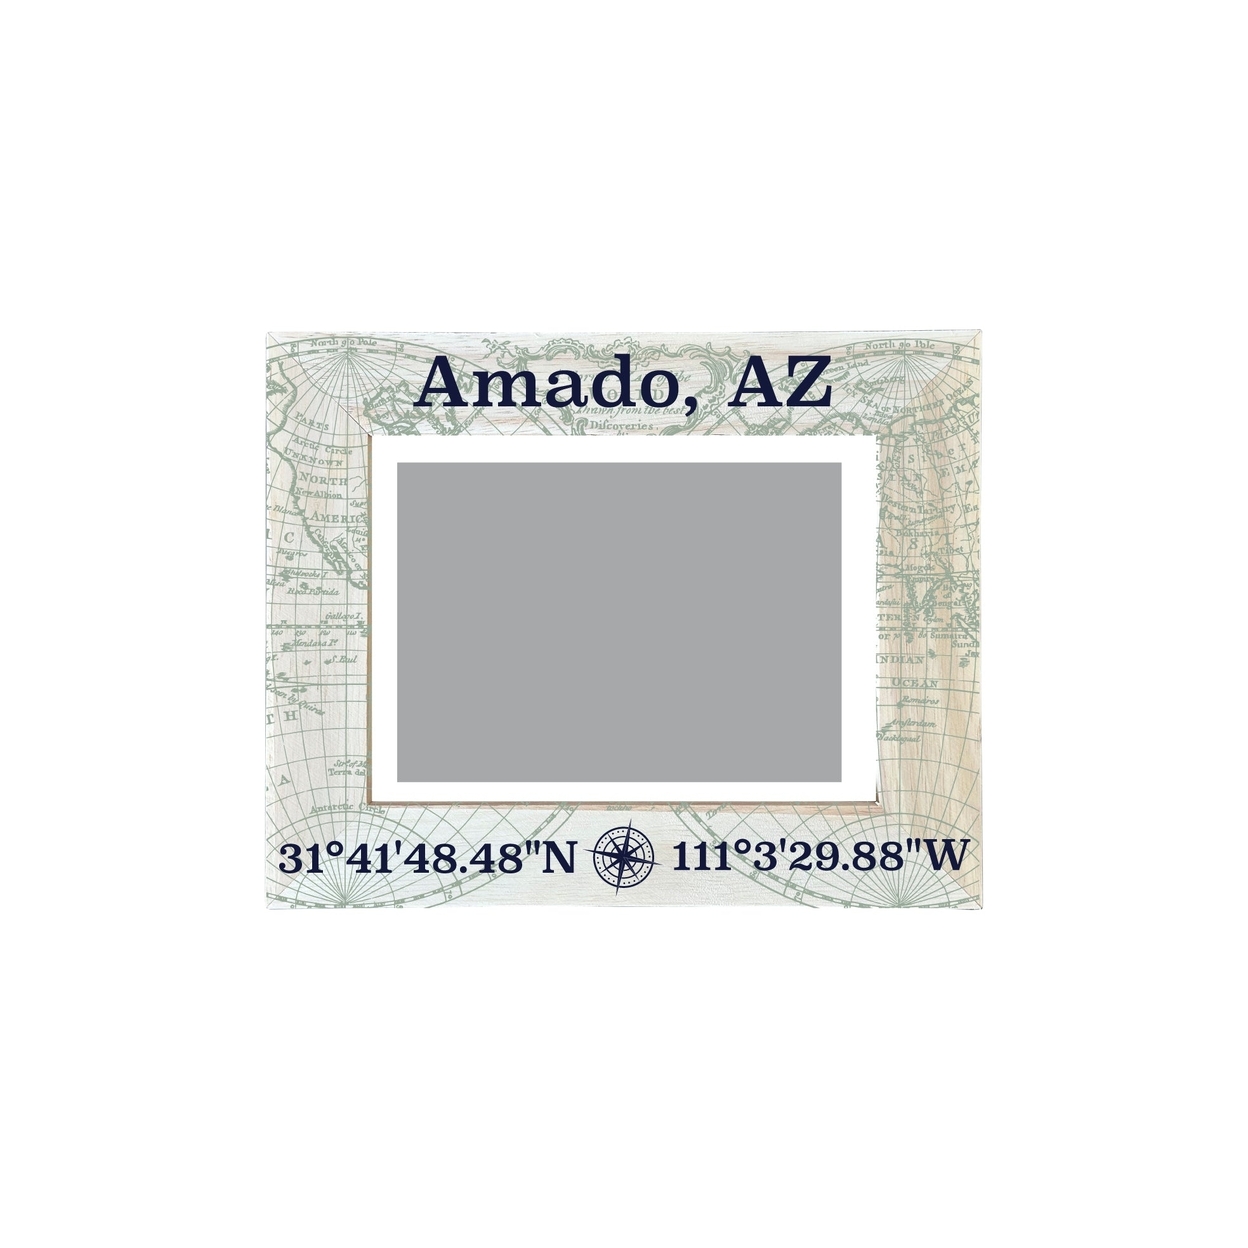 R and R Imports Amado Arizona Souvenir Wooden Photo Frame Compass Coordinates Design Matted to 4 x 6"